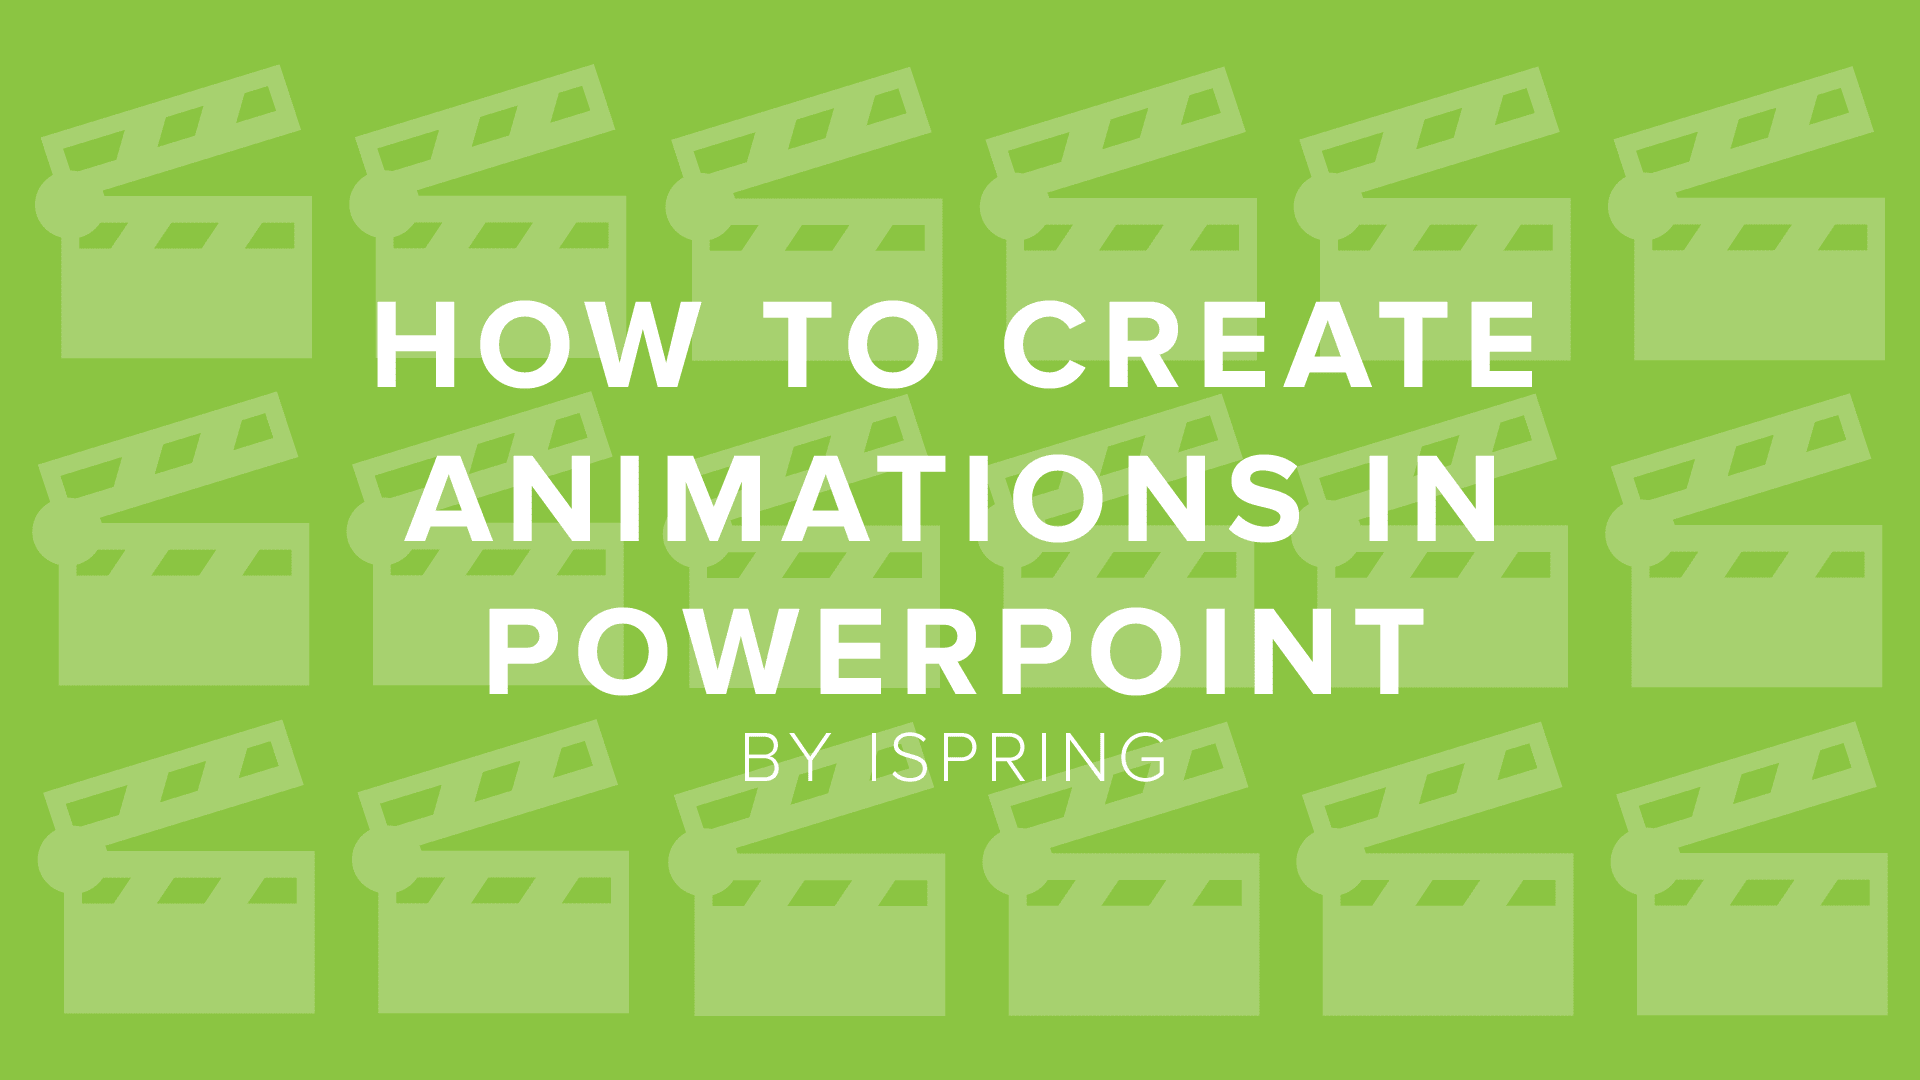 DigitalChalk: How to Create Educational Animations in PowerPoint to “Gamify” Your Course